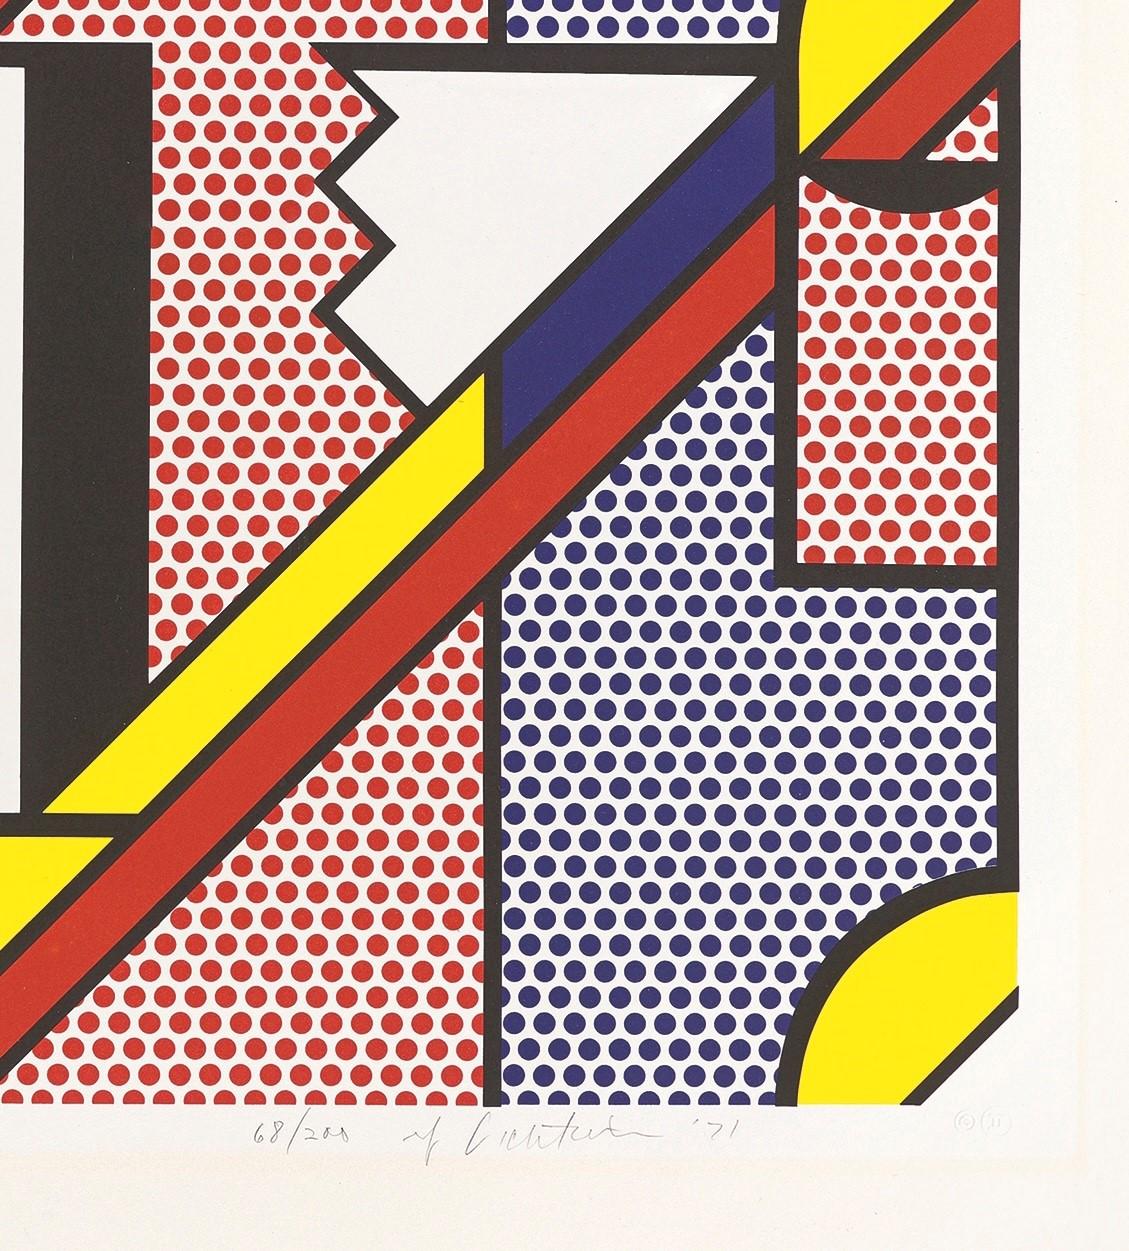 Numbered in pencil, signed and dated '71. Published by Roy Lichtenstein and Gemini G.EL. Los Angeles, for the Museum of Modern Art New York. 4 colors in 5 runs, from 4 aluminum plates and 1 screen. Catalogue Raisonne The Prints of Roy Lichtenstein